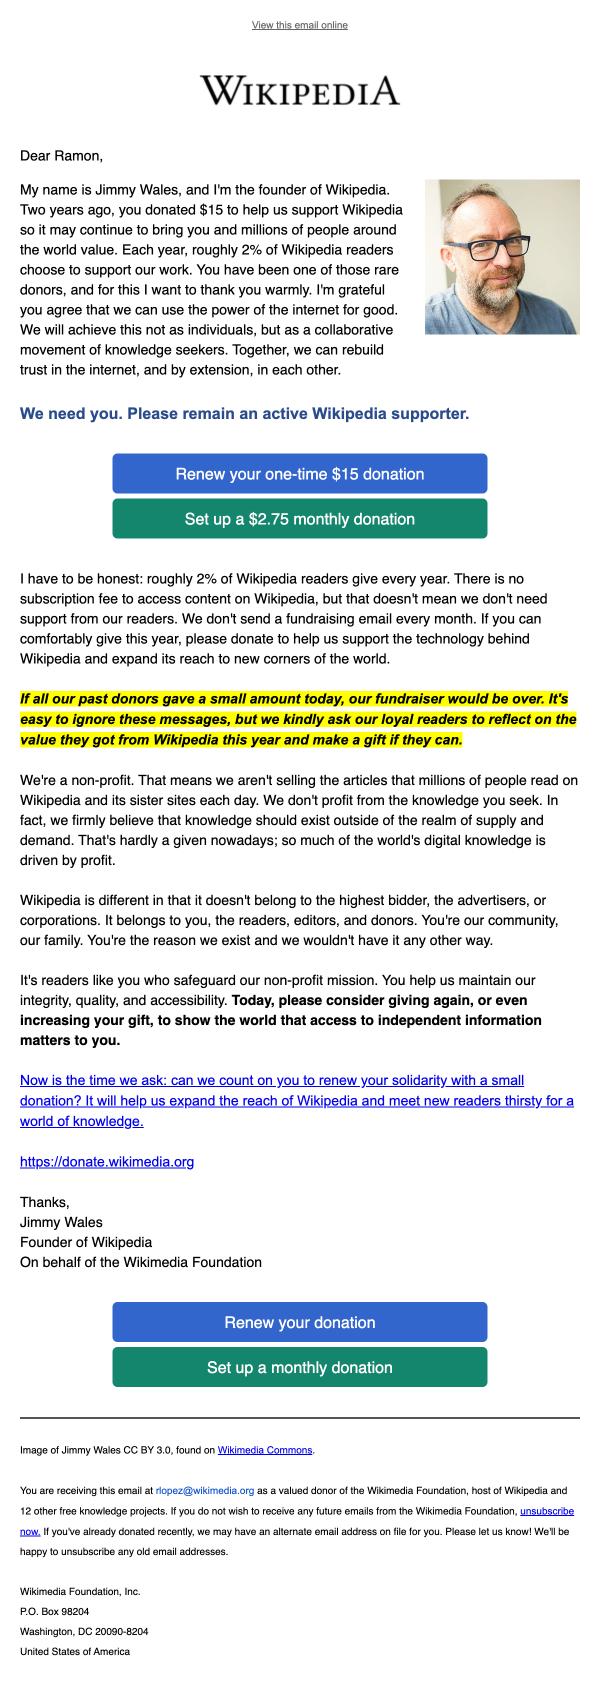 Example of a fundraising email sent to previous Wikimedia Foundation donors